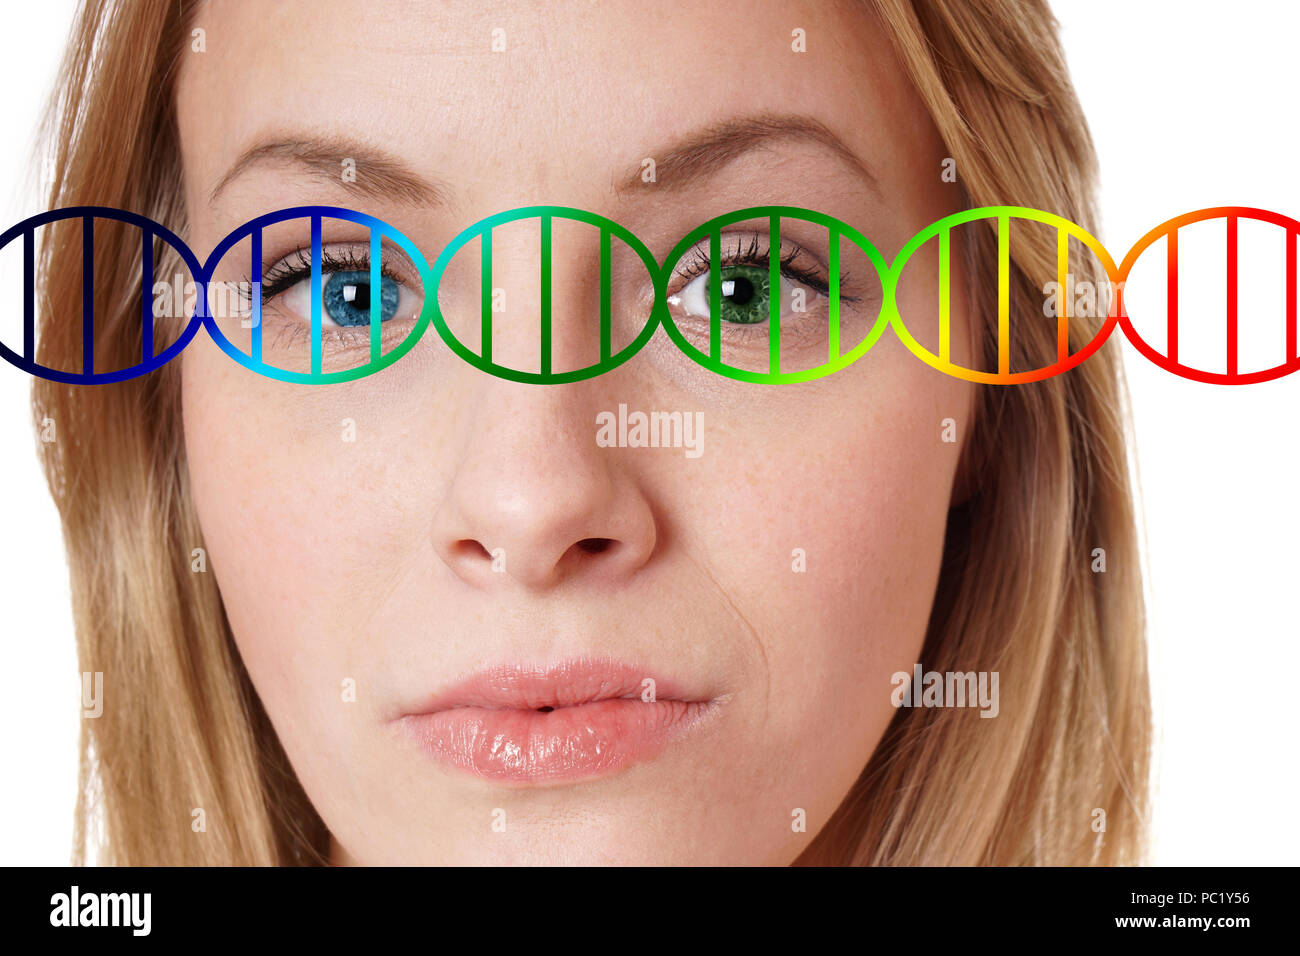 human genome editing concept, close-up portrait of a young woman with one blue and one green eye color overlayed with dna double helix Stock Photo